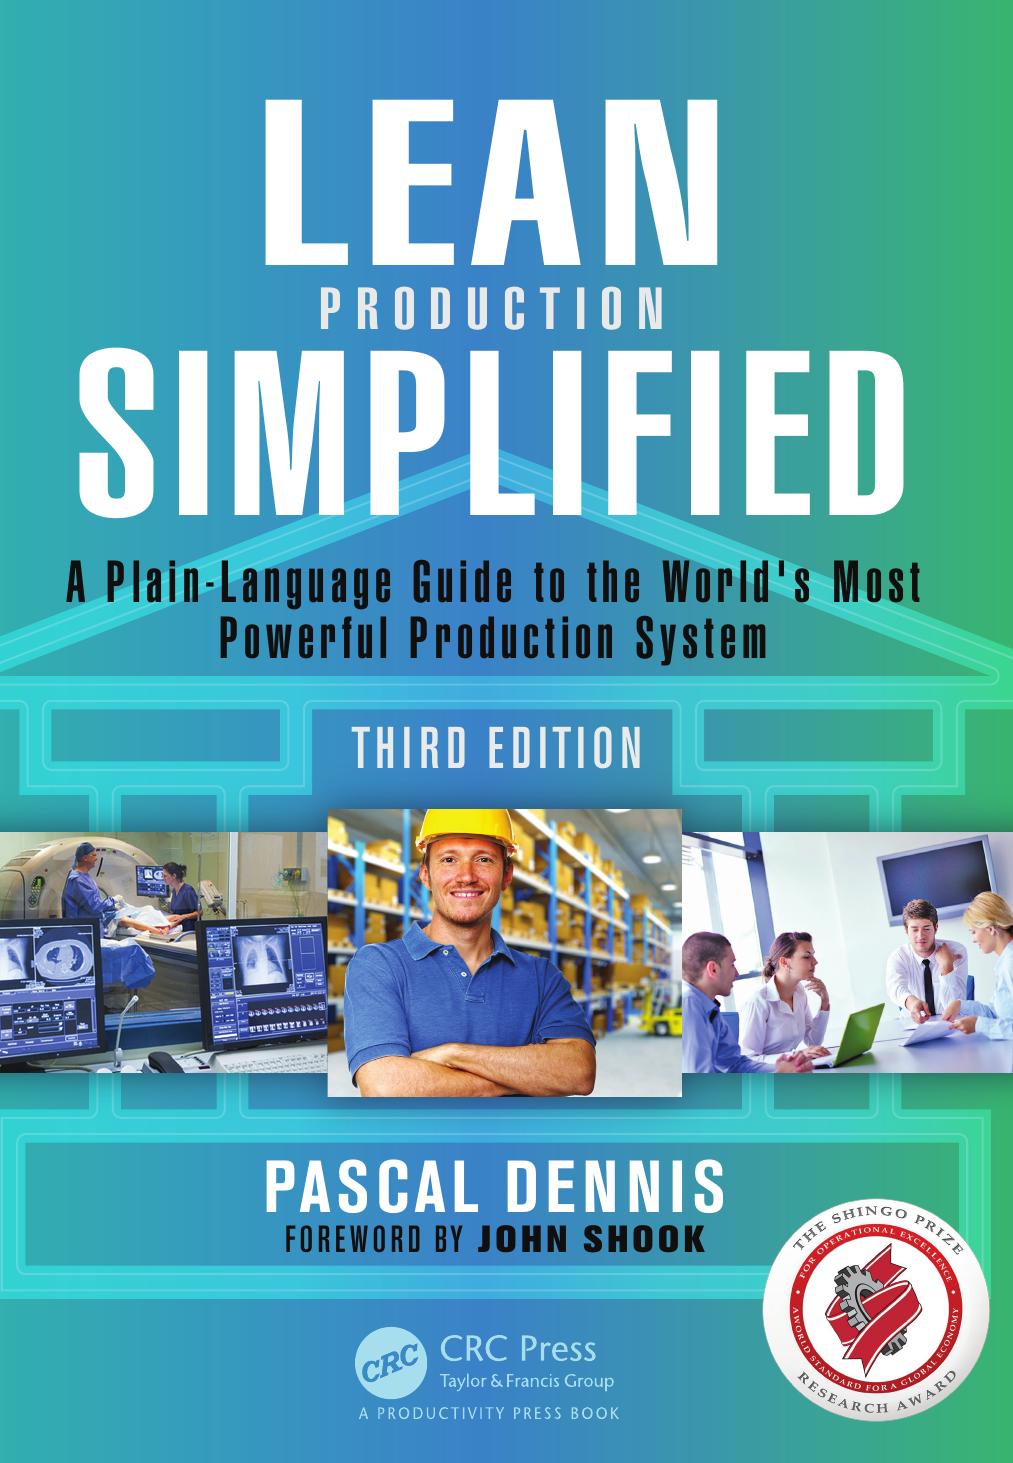 Lean Production Simplified, Third Edition a Plain-Language Guide to the World's Most Powerful Production System 2015